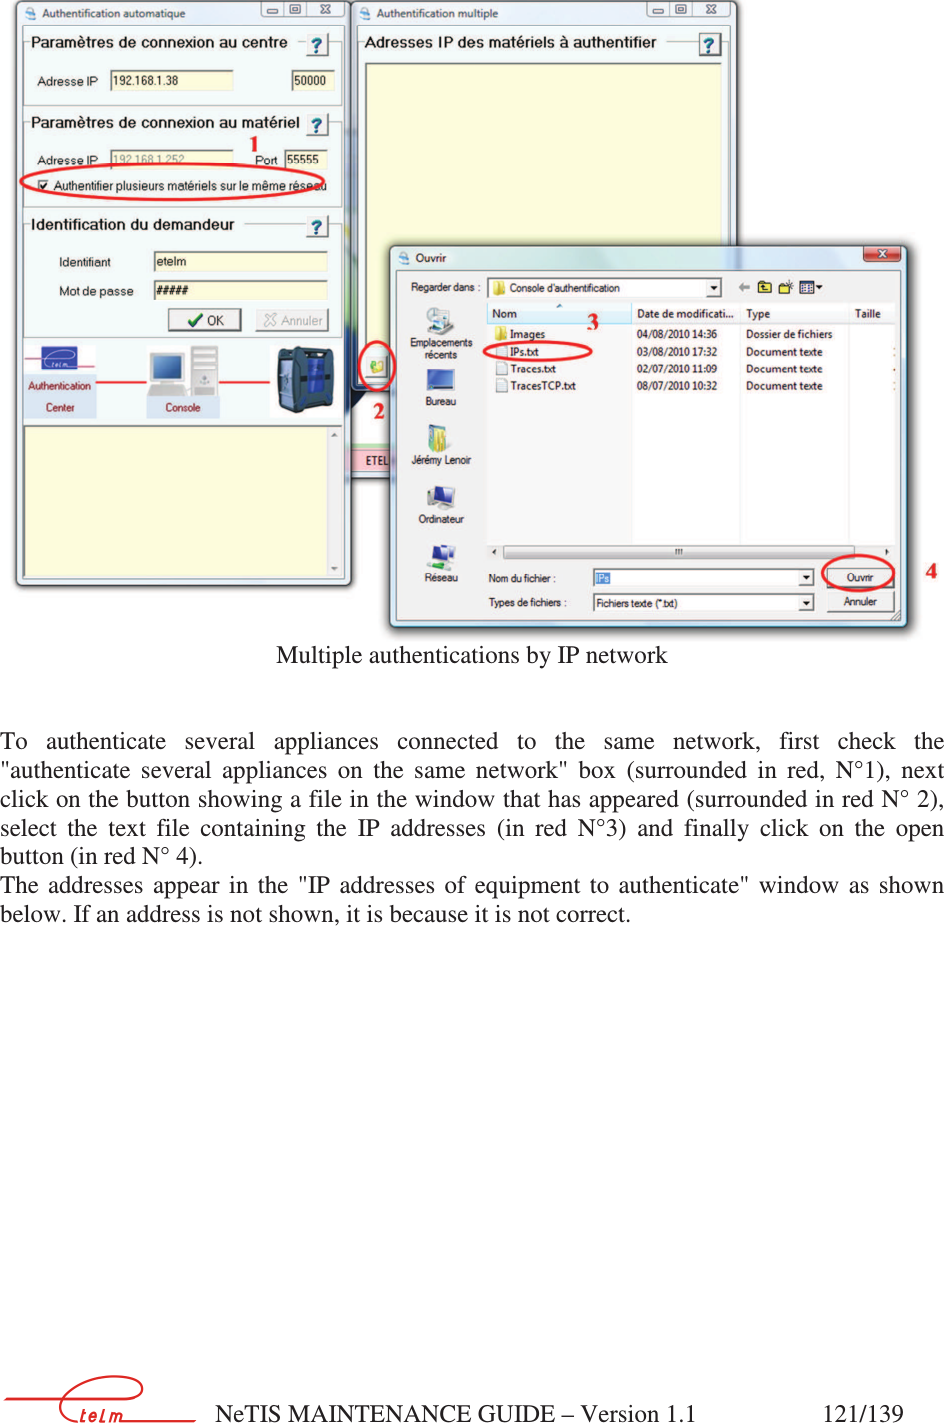        NeTIS MAINTENANCE GUIDE – Version 1.1                    121/139    Multiple authentications by IP network   To  authenticate  several  appliances  connected  to  the  same  network,  first  check  the &quot;authenticate  several  appliances  on  the  same  network&quot;  box  (surrounded  in  red,  N°1),  next click on the button showing a file in the window that has appeared (surrounded in red N° 2), select  the  text  file  containing  the  IP  addresses  (in  red  N°3)  and  finally  click  on  the  open button (in red N° 4). The  addresses  appear  in  the  &quot;IP  addresses  of  equipment  to  authenticate&quot;  window  as  shown below. If an address is not shown, it is because it is not correct.  